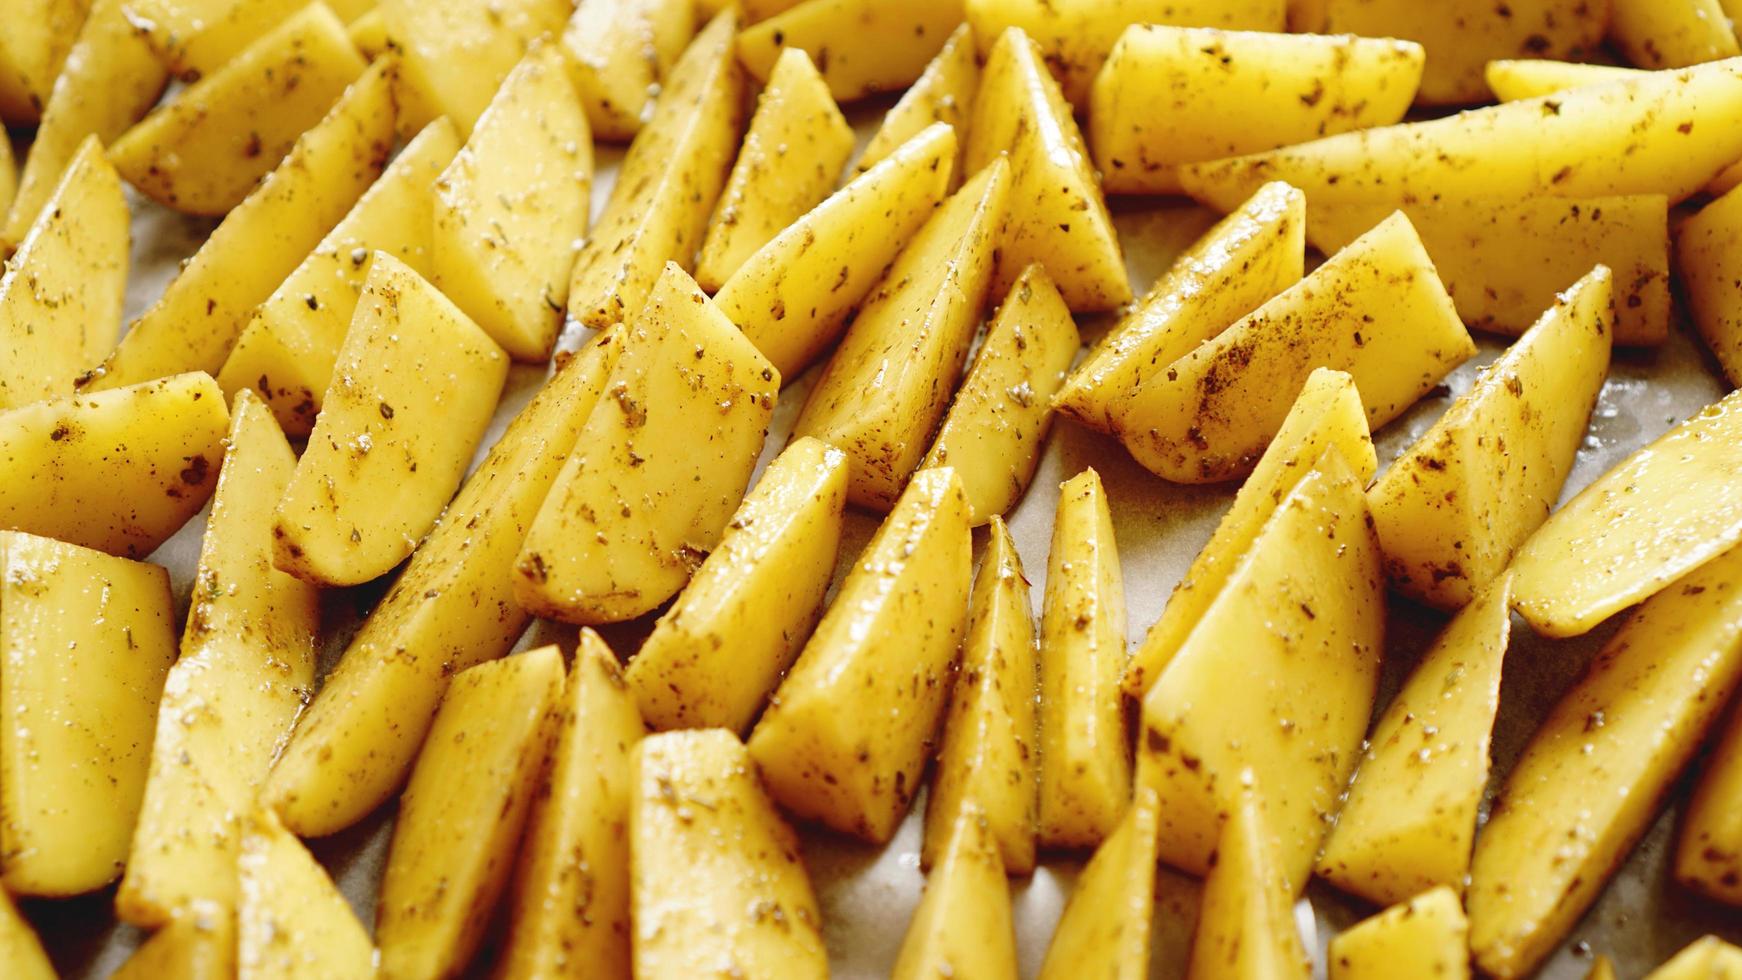 Sliced raw potatoes on a baking sheet with spices photo